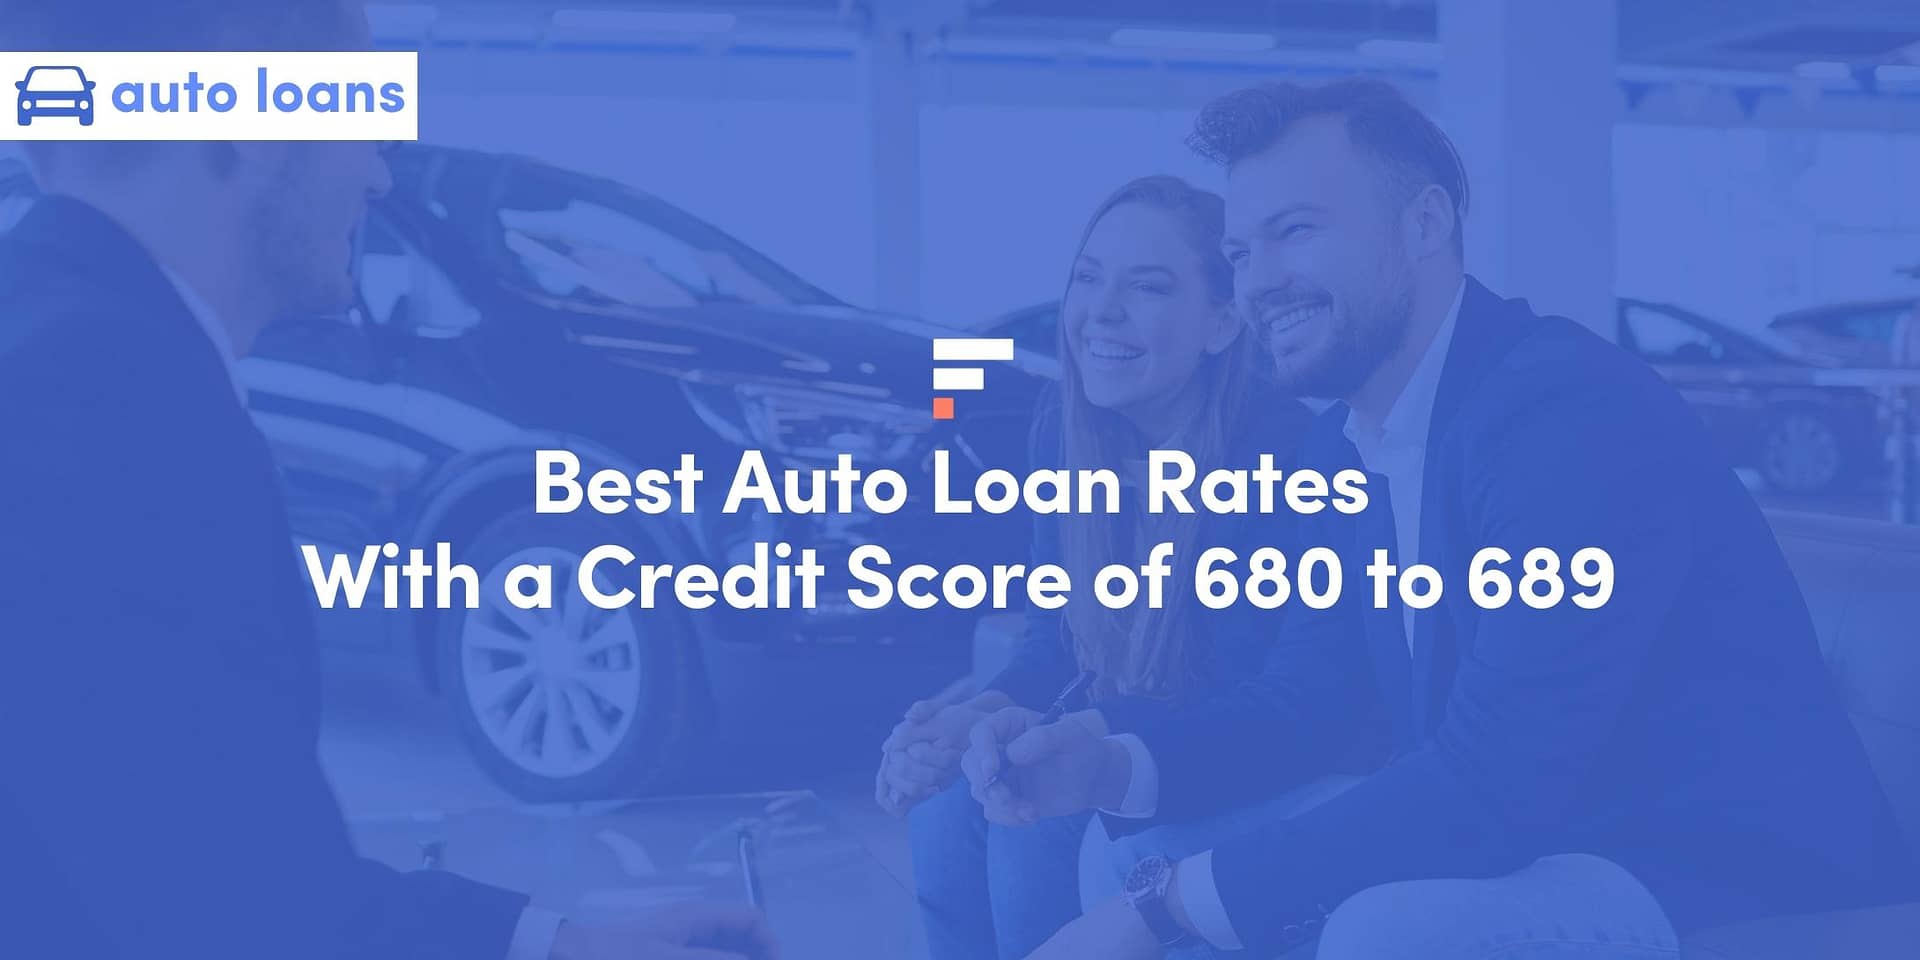 Best Auto Loan Rates With a Credit Score of 680 to 689